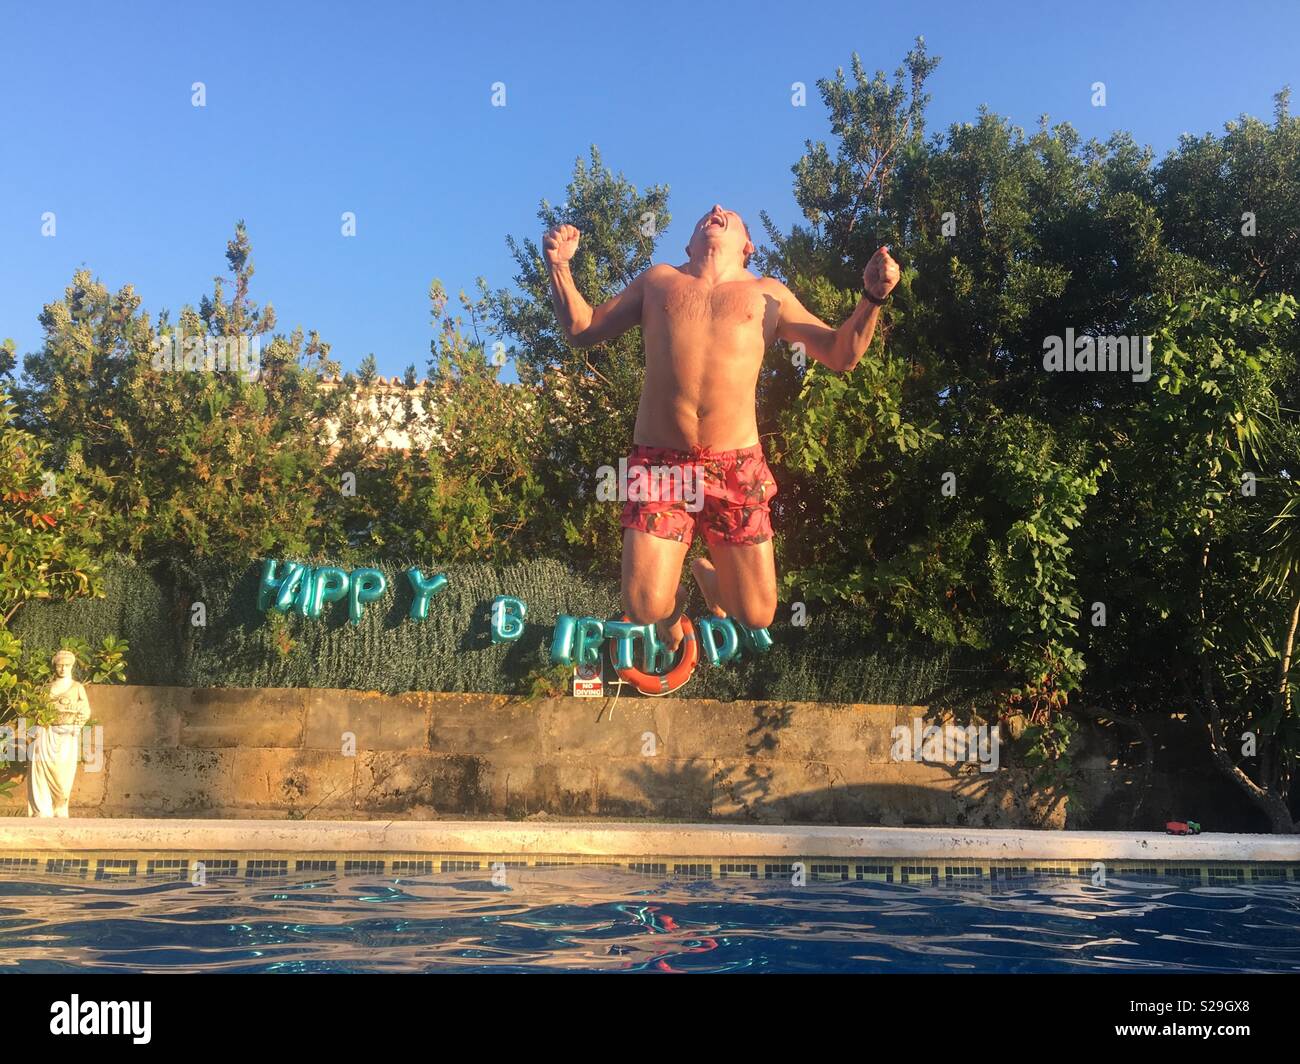 Man celebrating his birthday by jumping into a swimming pool Stock Photo